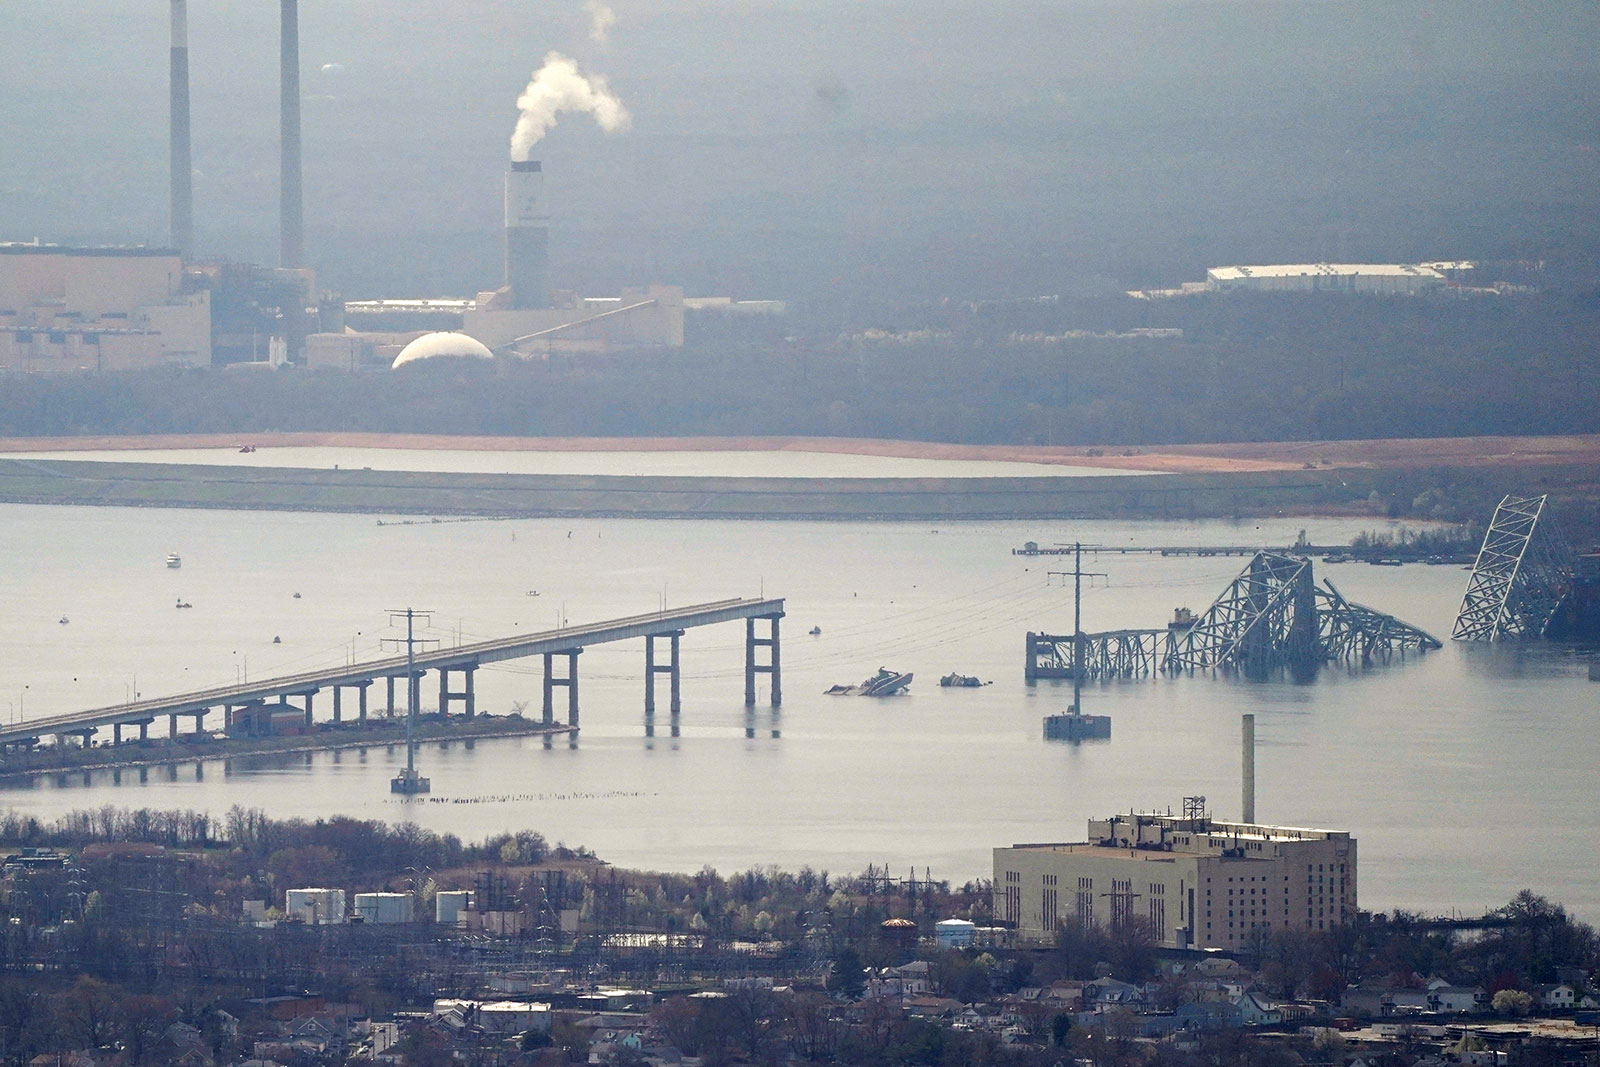 The collapsed Francis Scott Key Bridge is seen after being crashed into in Baltimore on Tuesday.